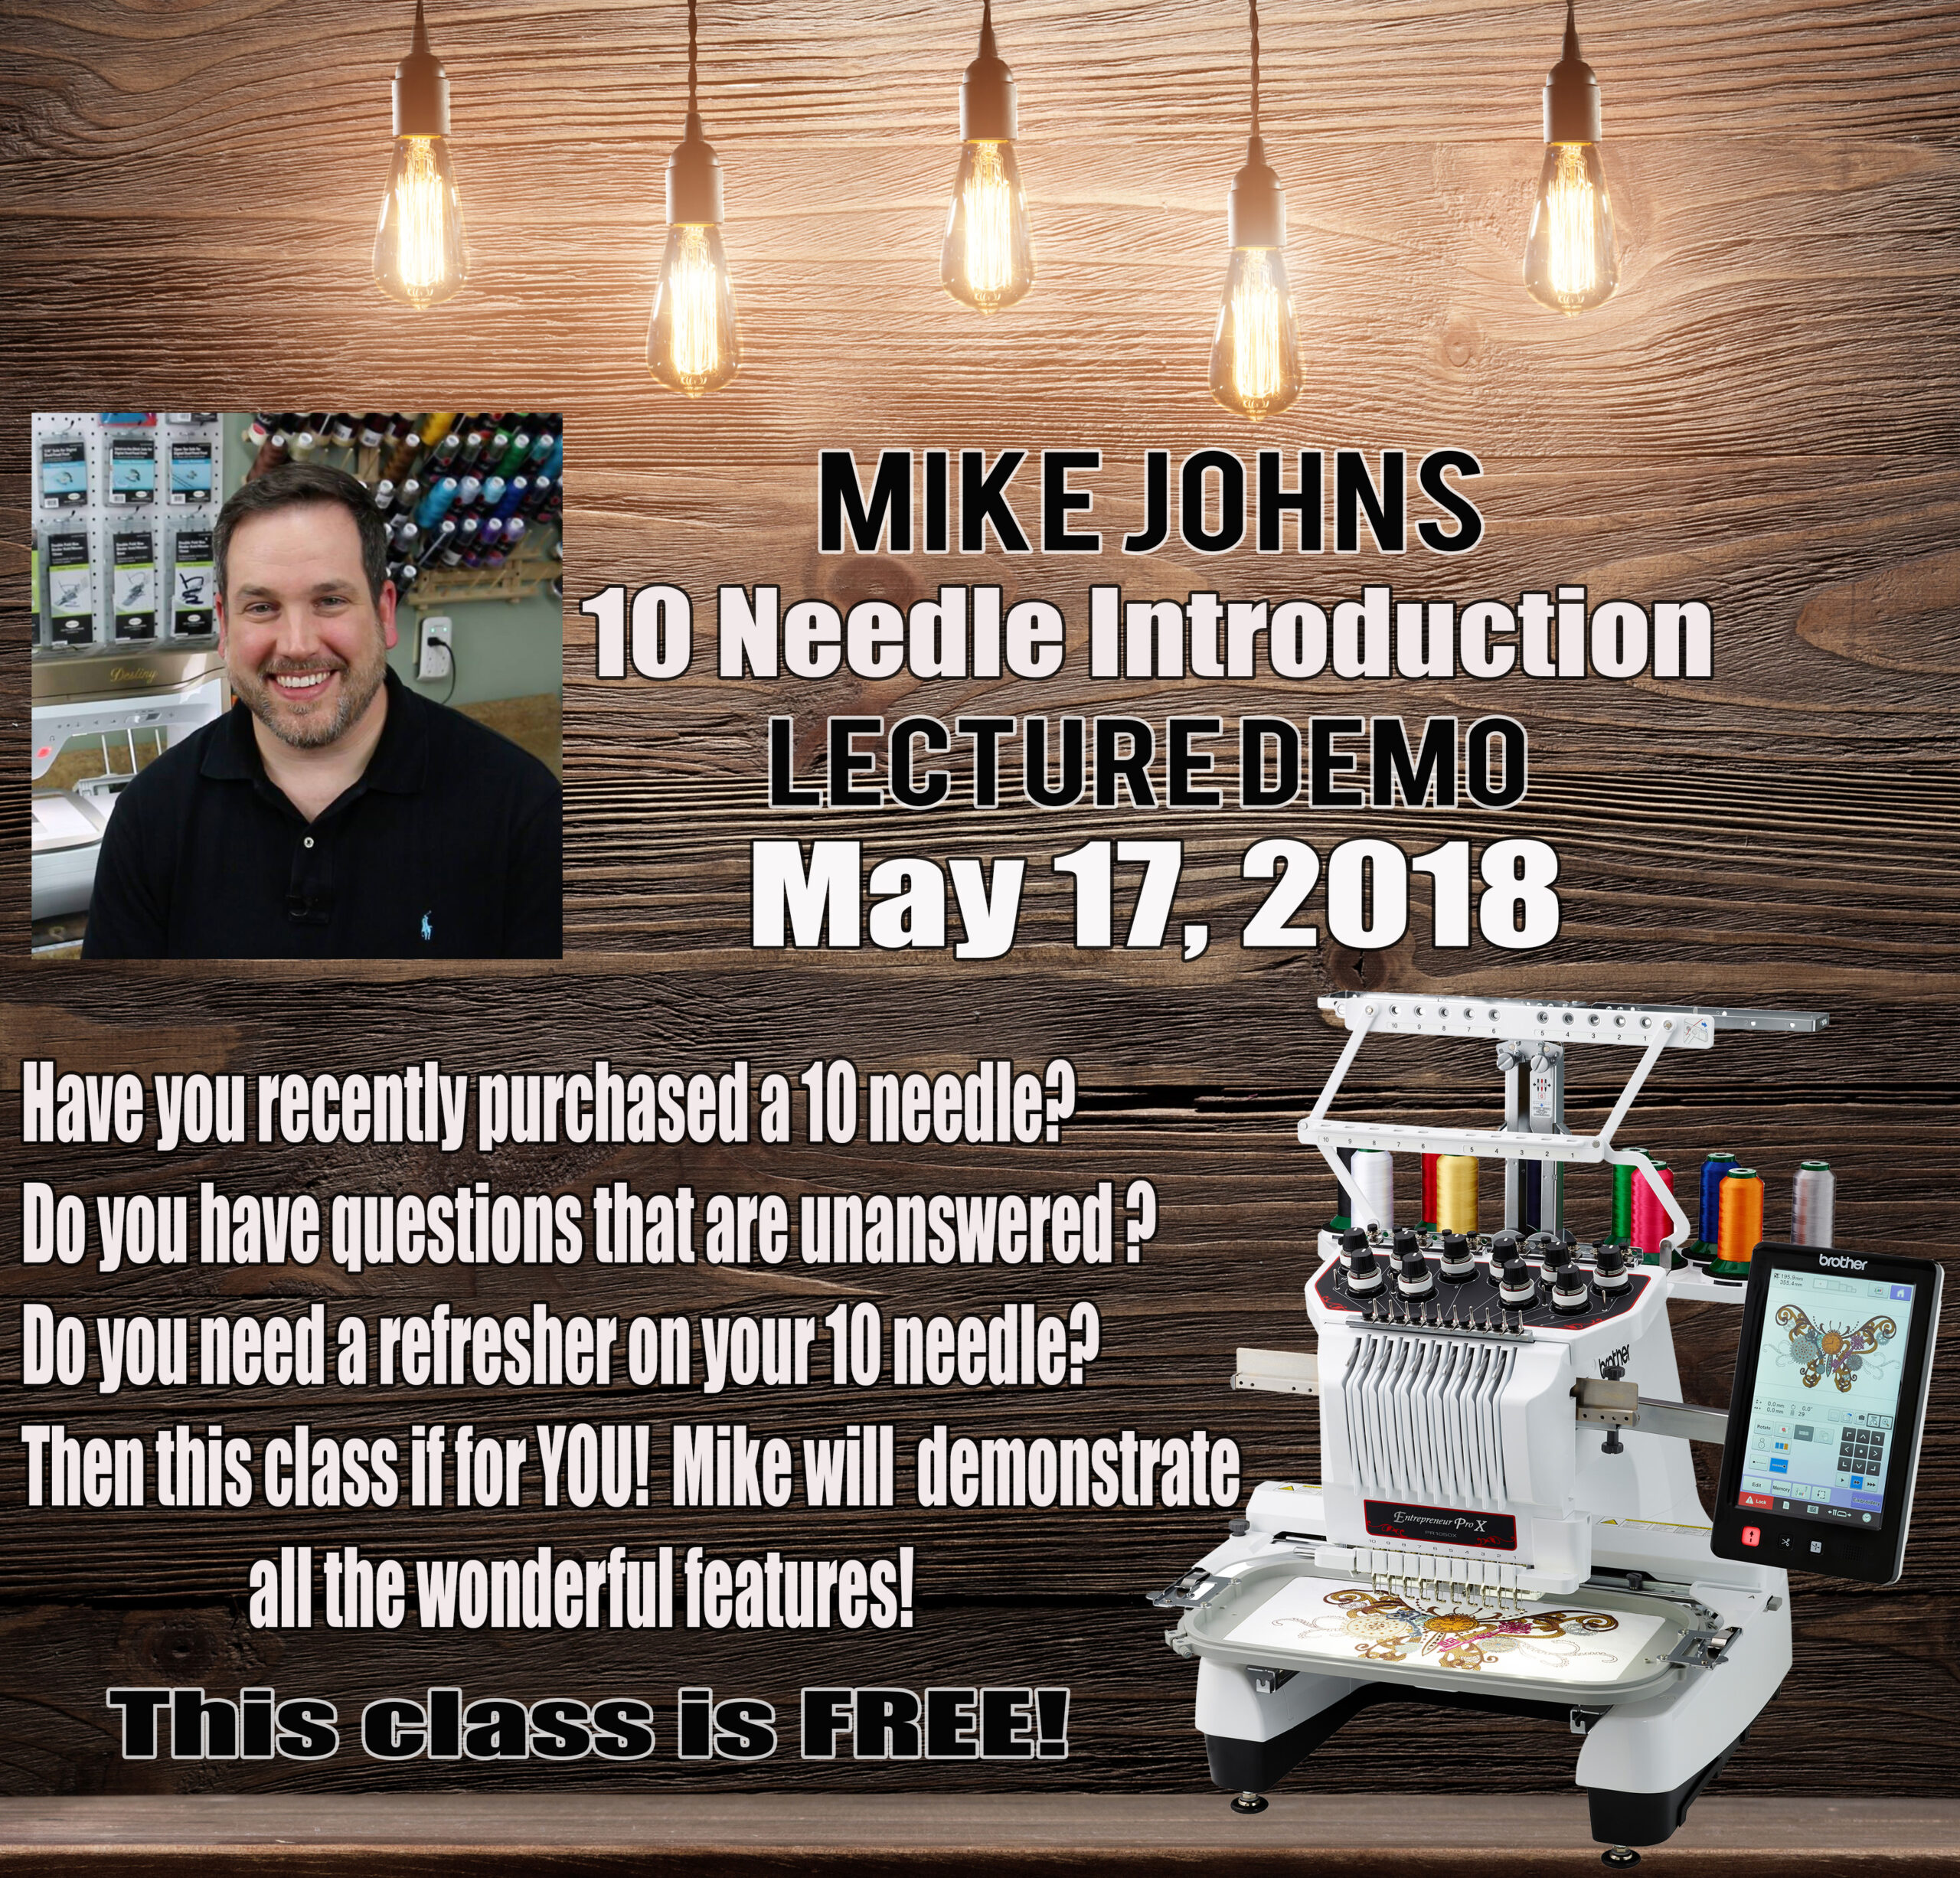 Mike Johns 10 Needle Class